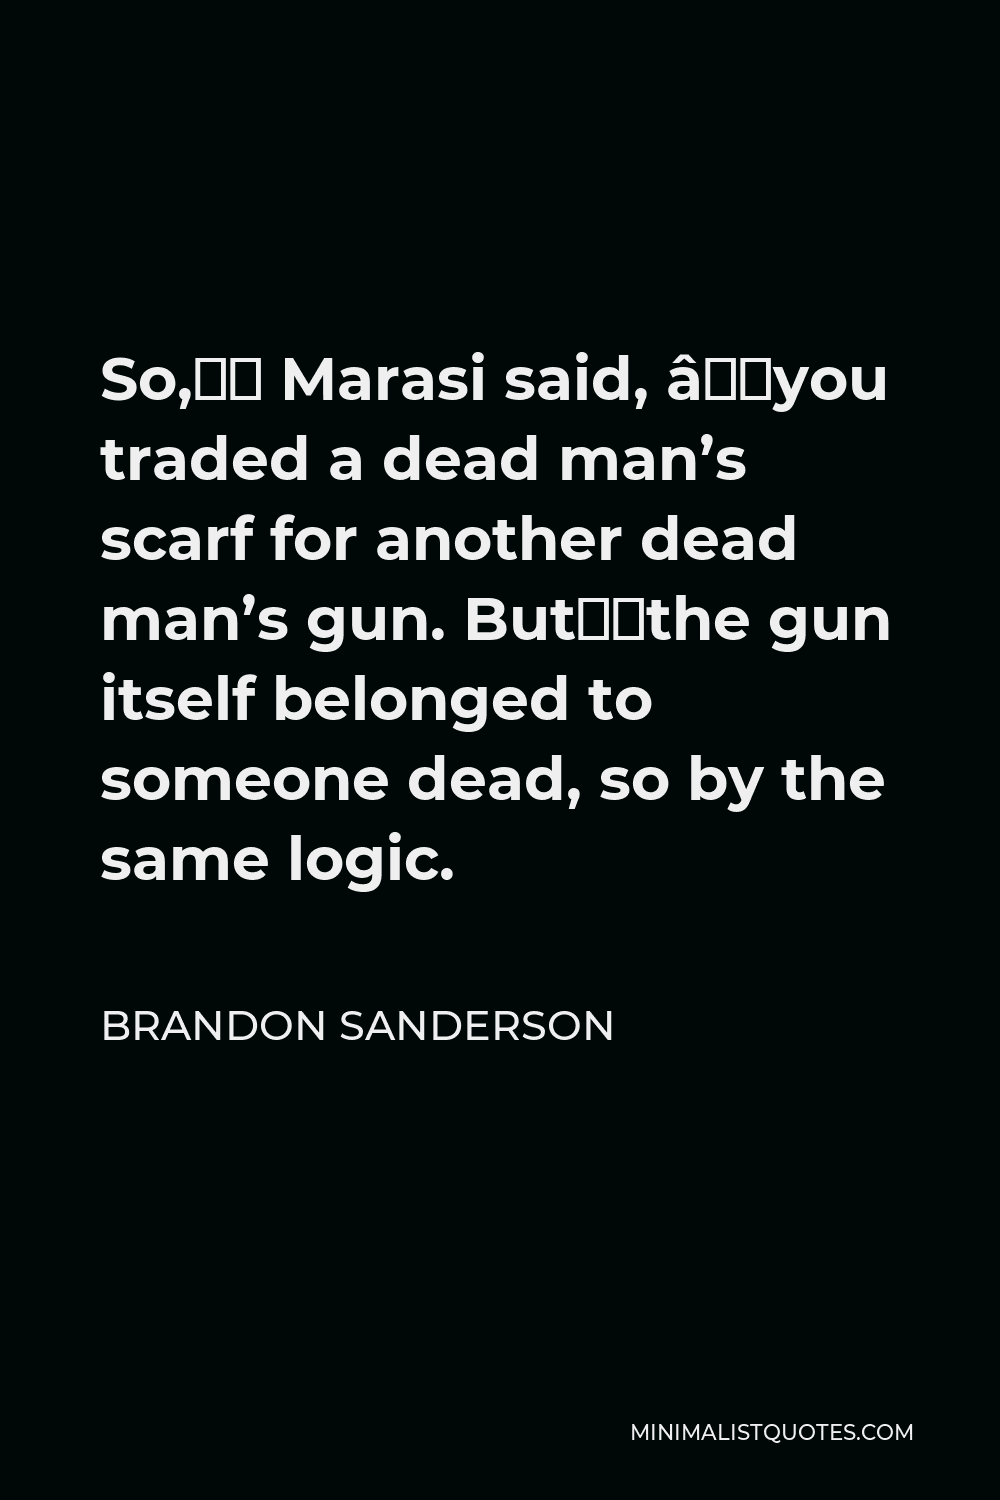 Brandon Sanderson Quote - So,” Marasi said, “you traded a dead man’s scarf for another dead man’s gun. But…the gun itself belonged to someone dead, so by the same logic.